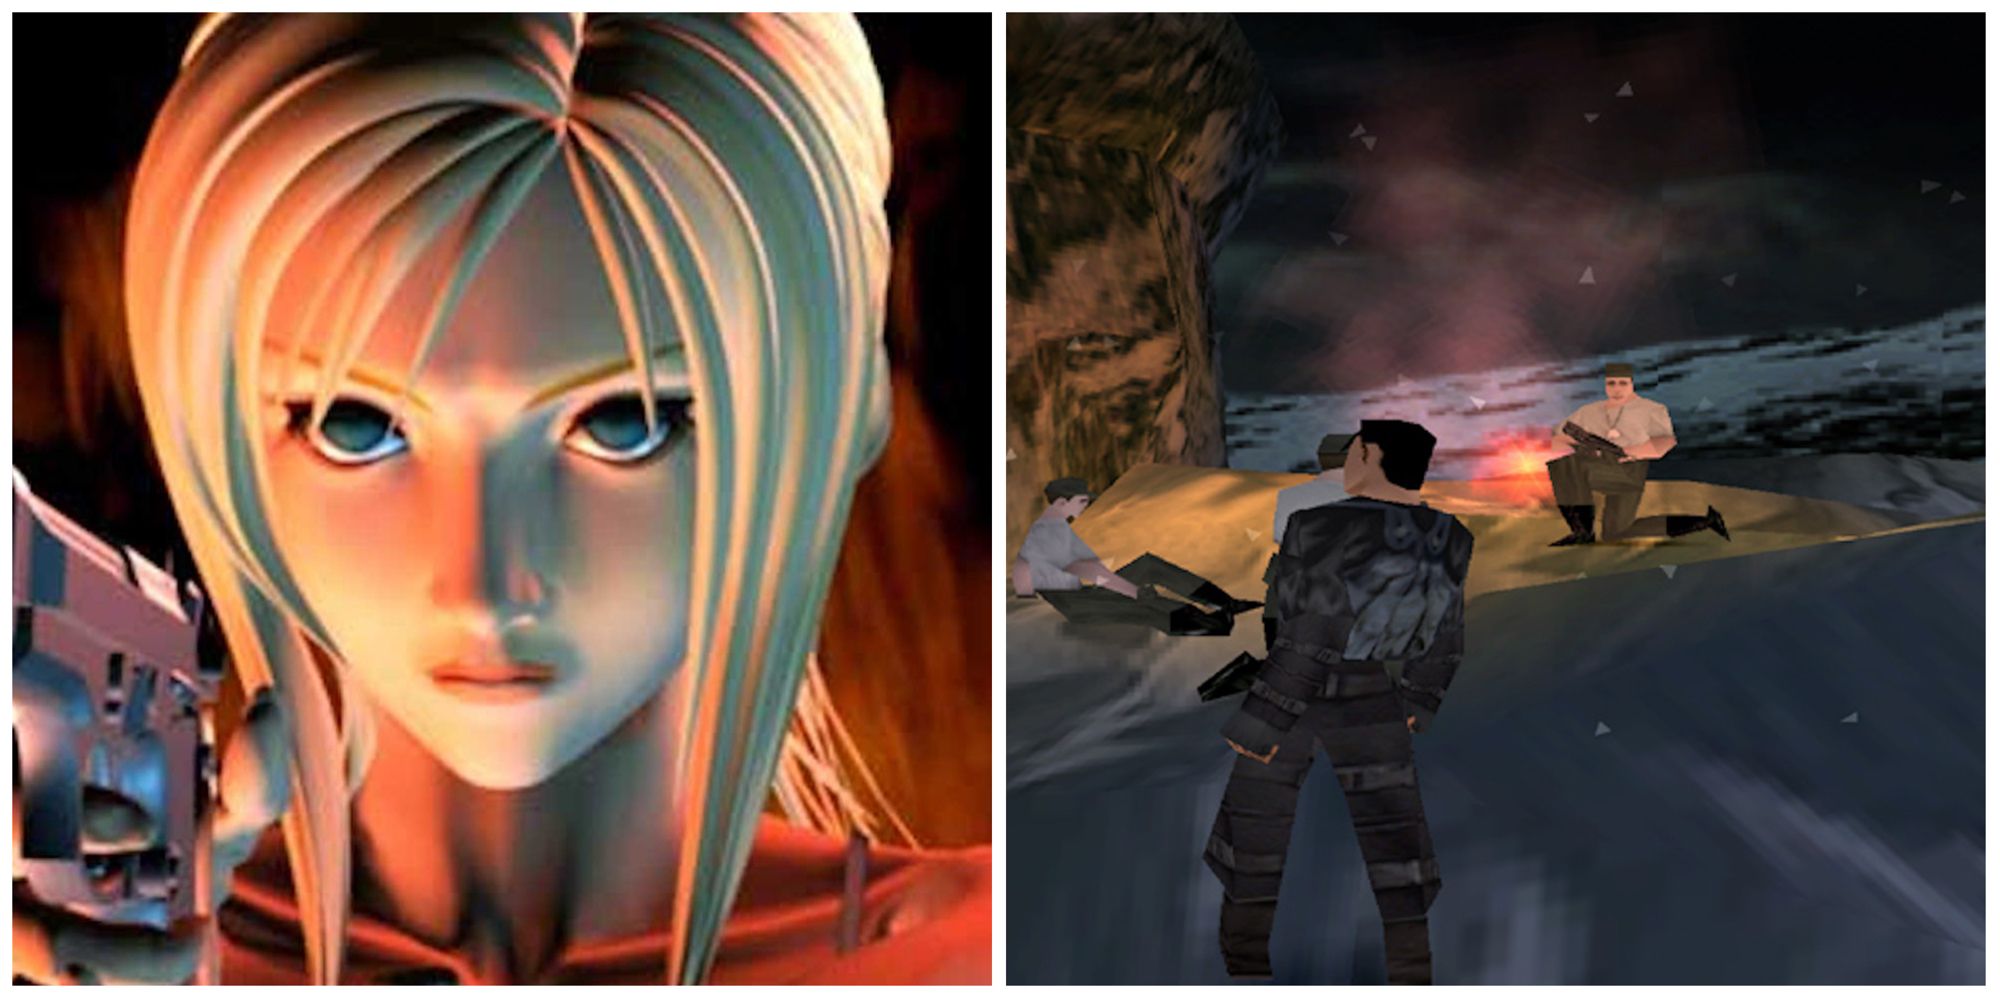 FantasyAnime on X: Appreciating Parasite Eve's low-poly 3D graphics  upscaled in a PlayStation 1 emulator  / X